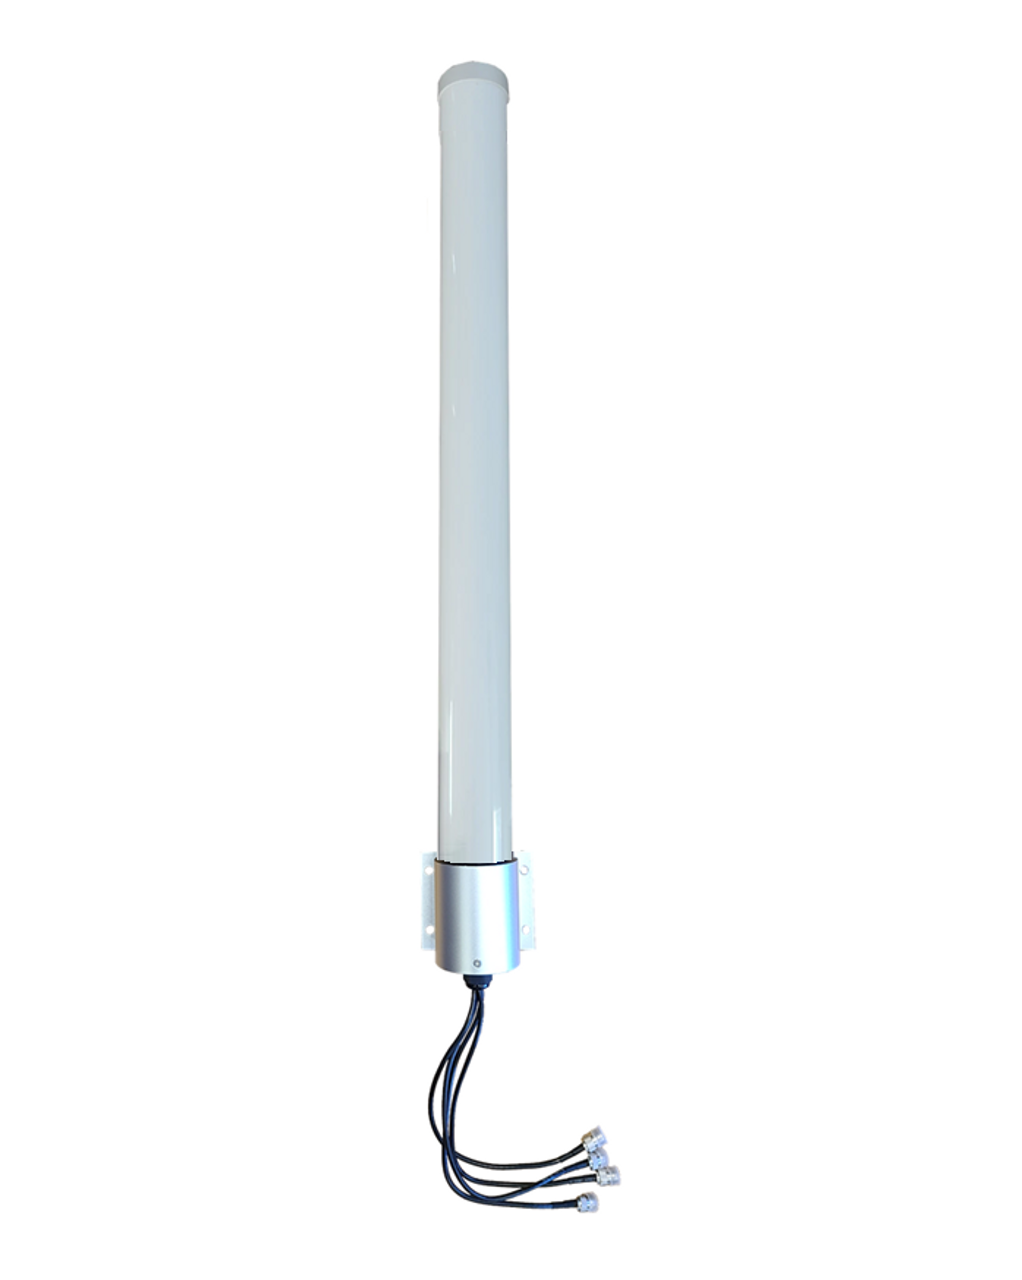 Cradlepoint IBR900 IBR1700 Antenna - M79 Omni Directional MIMO 4 x Cellular 4G LTE CBRS 5G NR M2M IoT Bracket Mount Antenna w/4 x 1ft Coax Cables - N Female